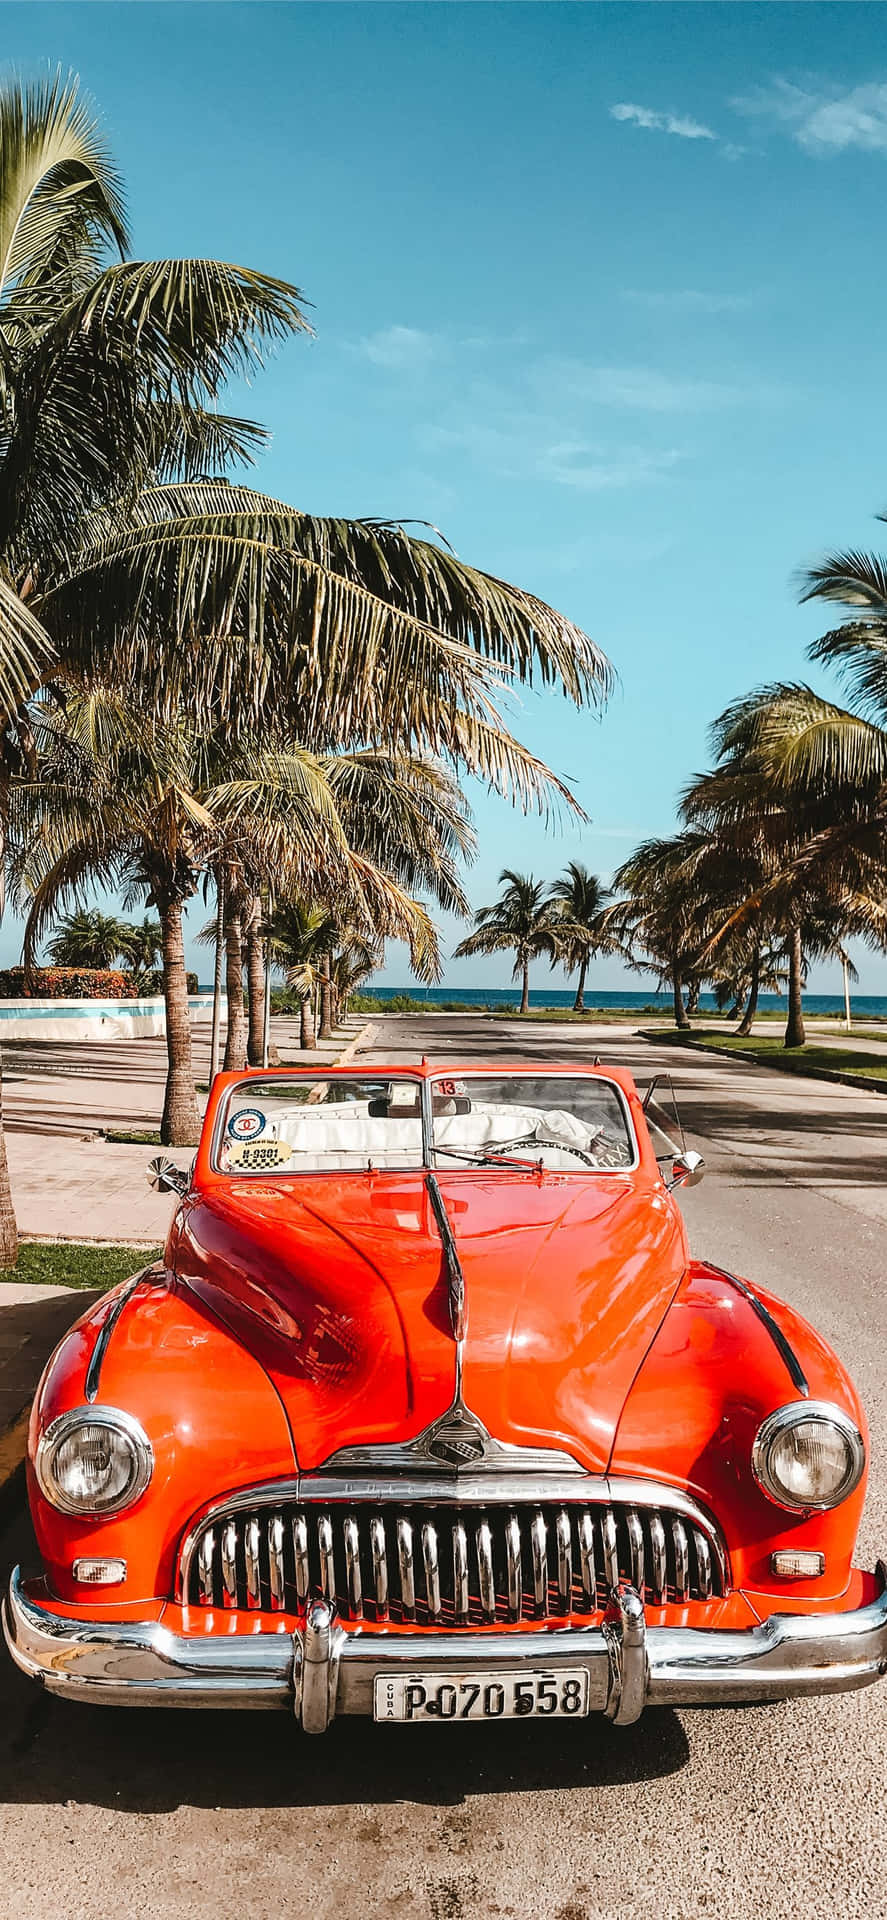 An Orange Classic Car Parked On The Beach Wallpaper